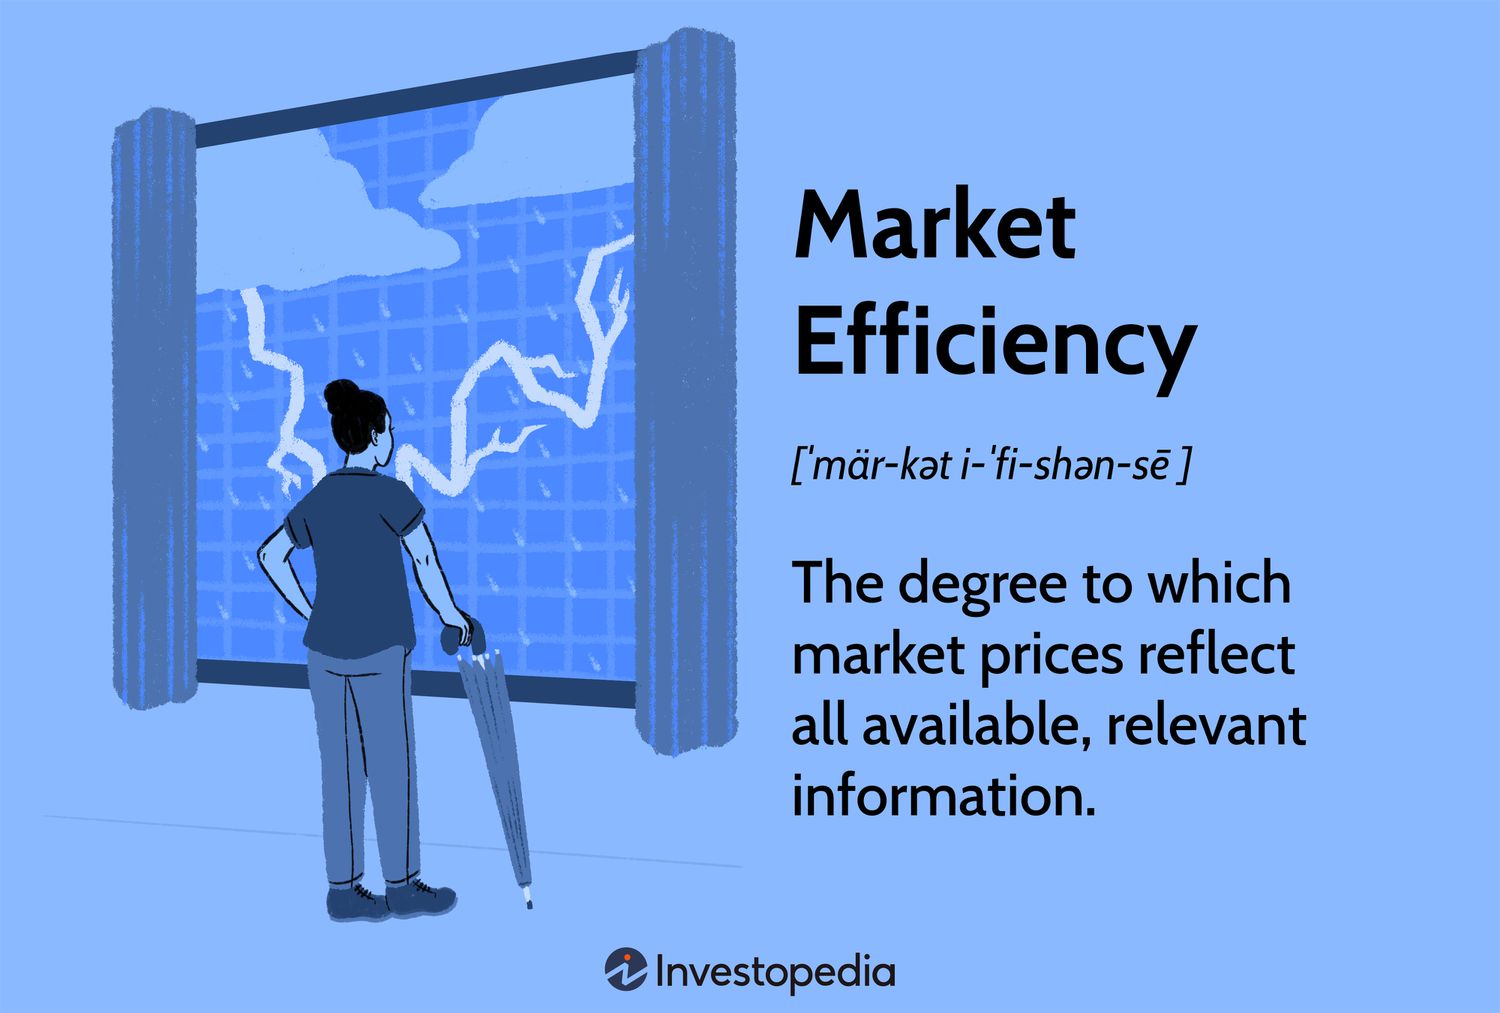 Market Efficiency: The degree to which market prices reflect all available, relevant information.